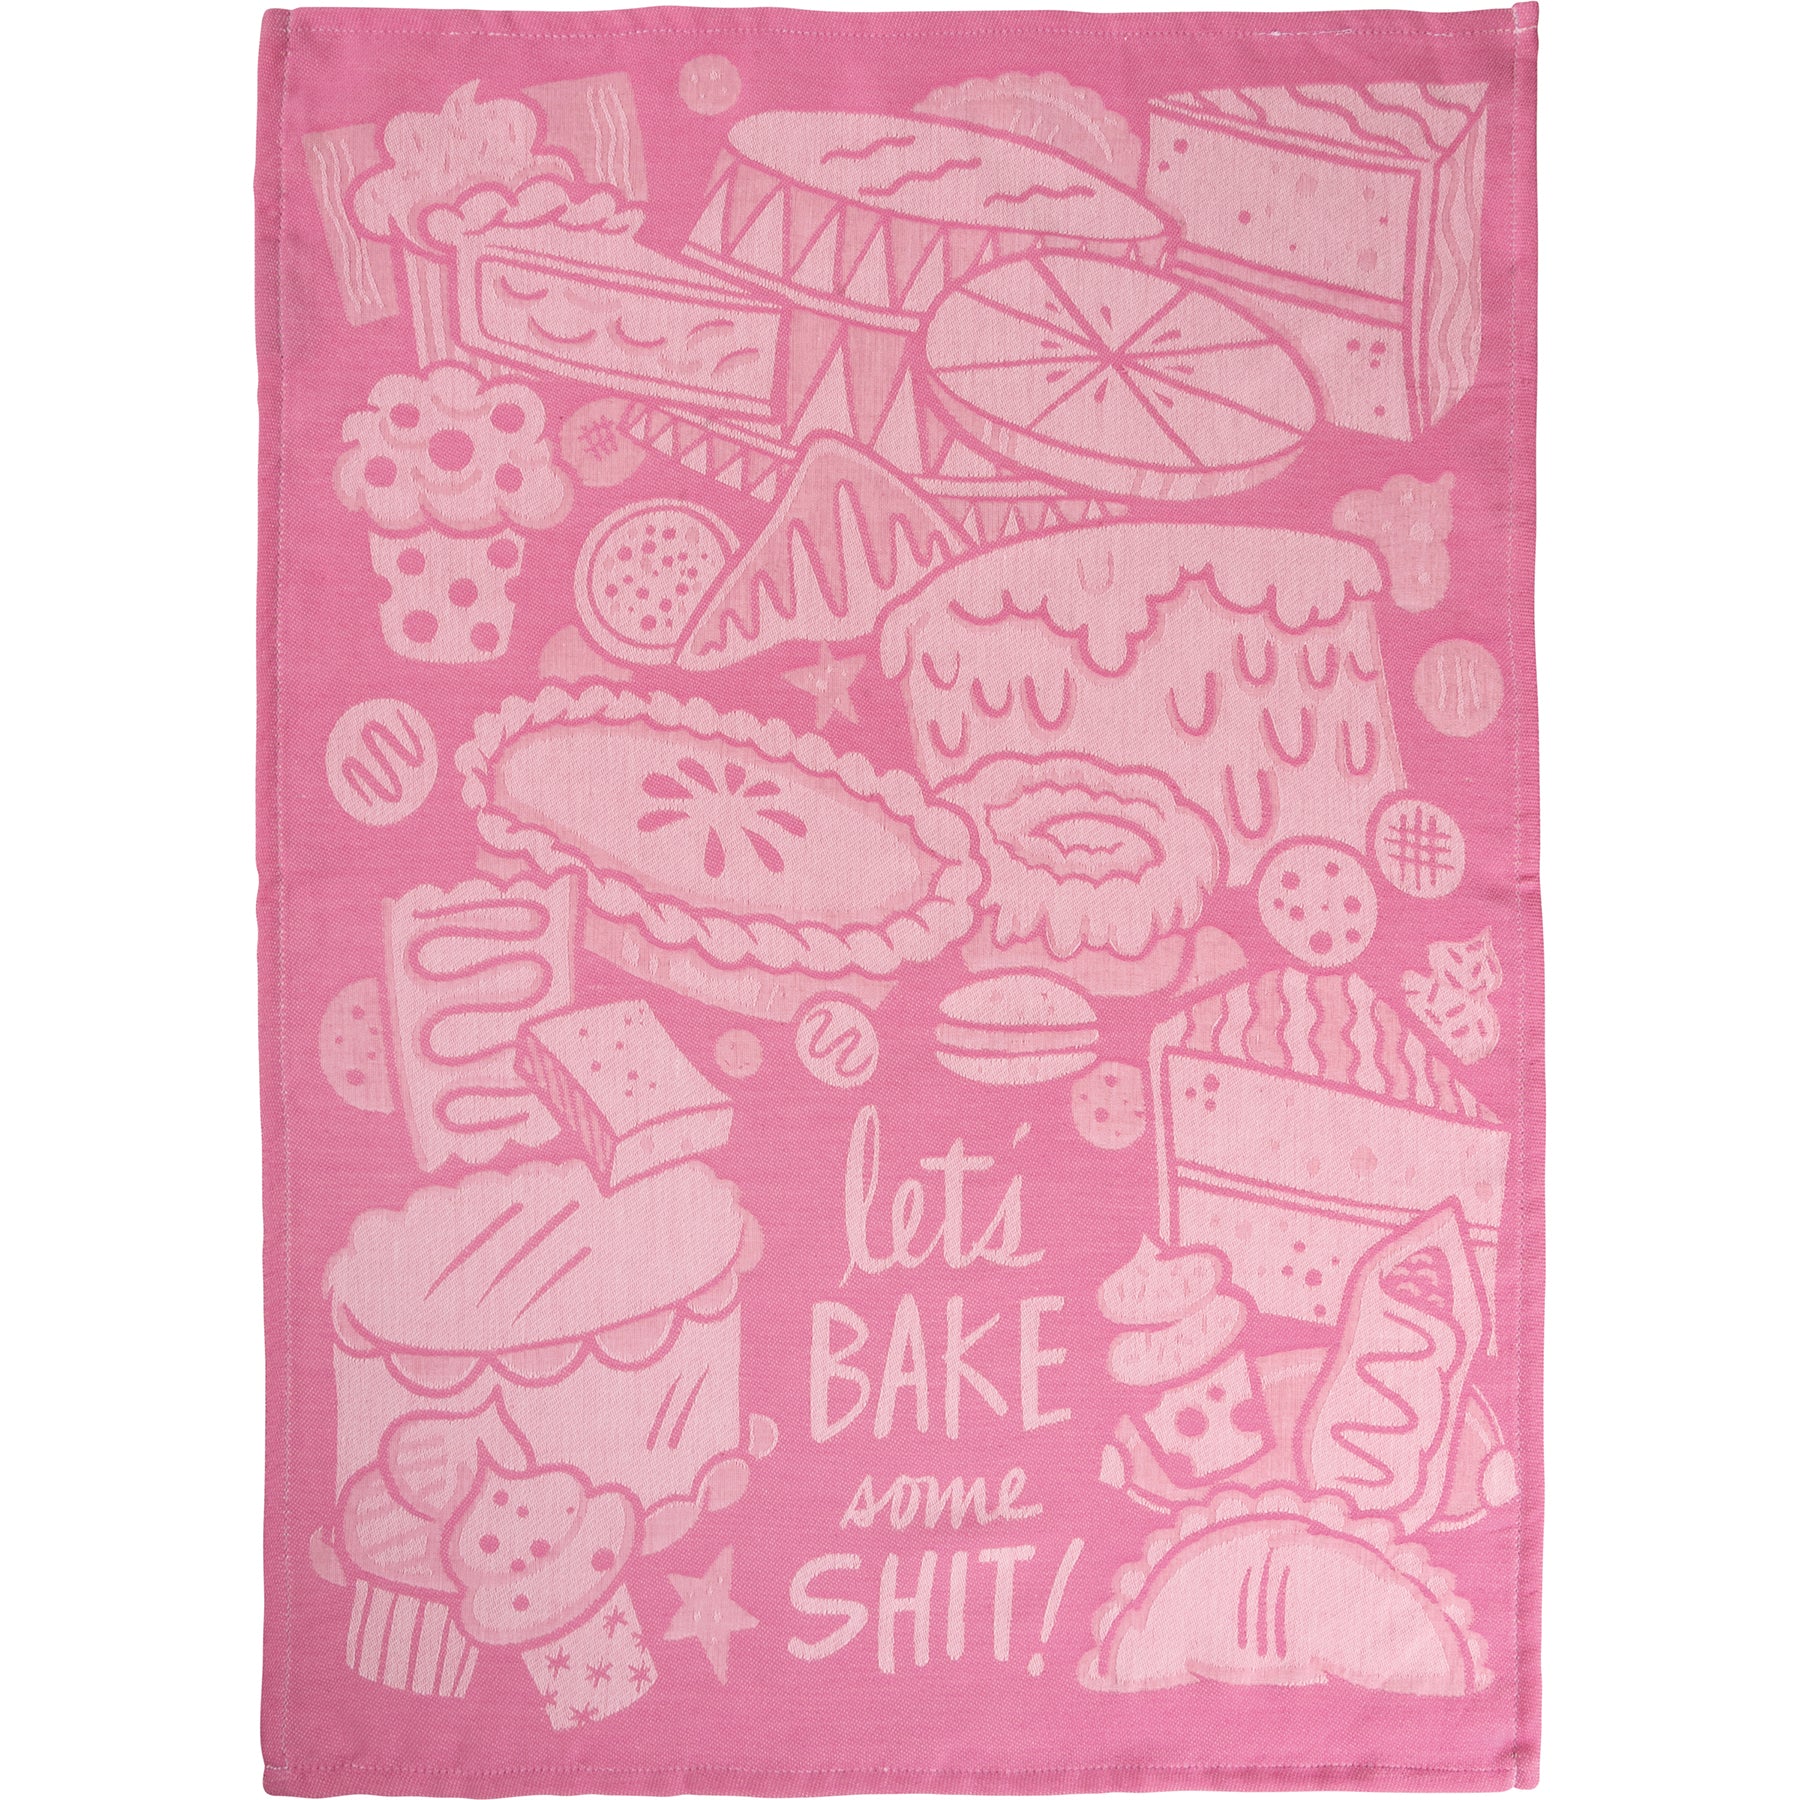 Let's Bake Some Shit Woven Pink Funny Snarky Dish Cloth Towel | Ultra Soft and Absorbent Jacquard | All-Over Design | Unfolds 20" x 28" | Giftable